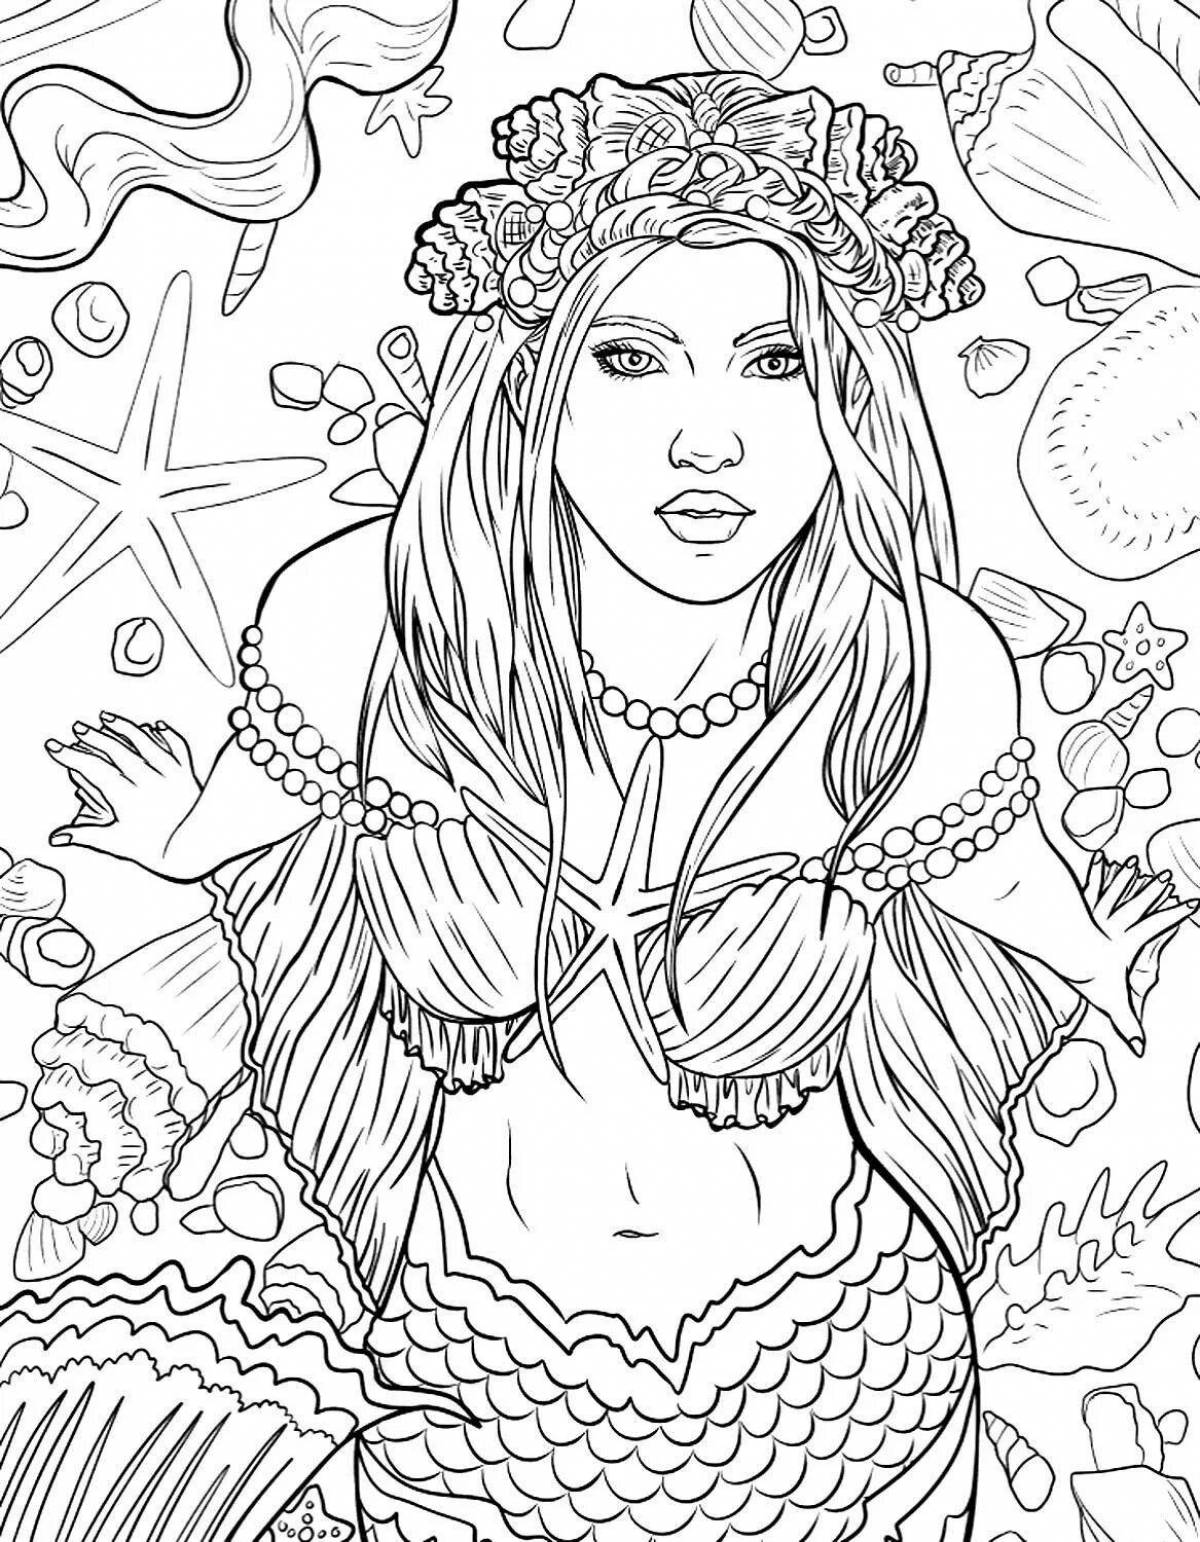 Amazing coloring pages of beautiful girls